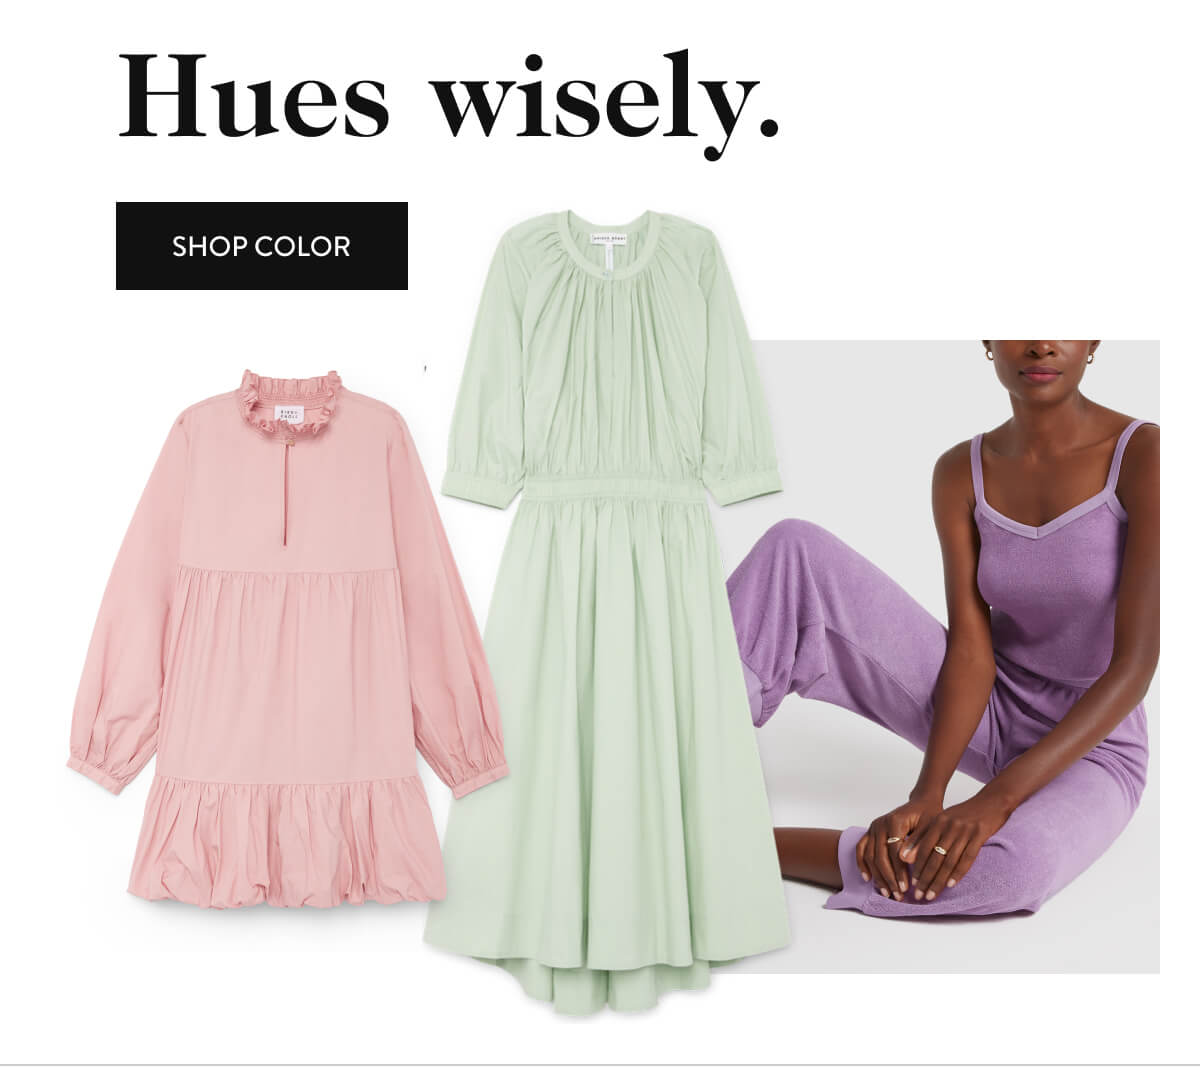 hues wisely - shop color